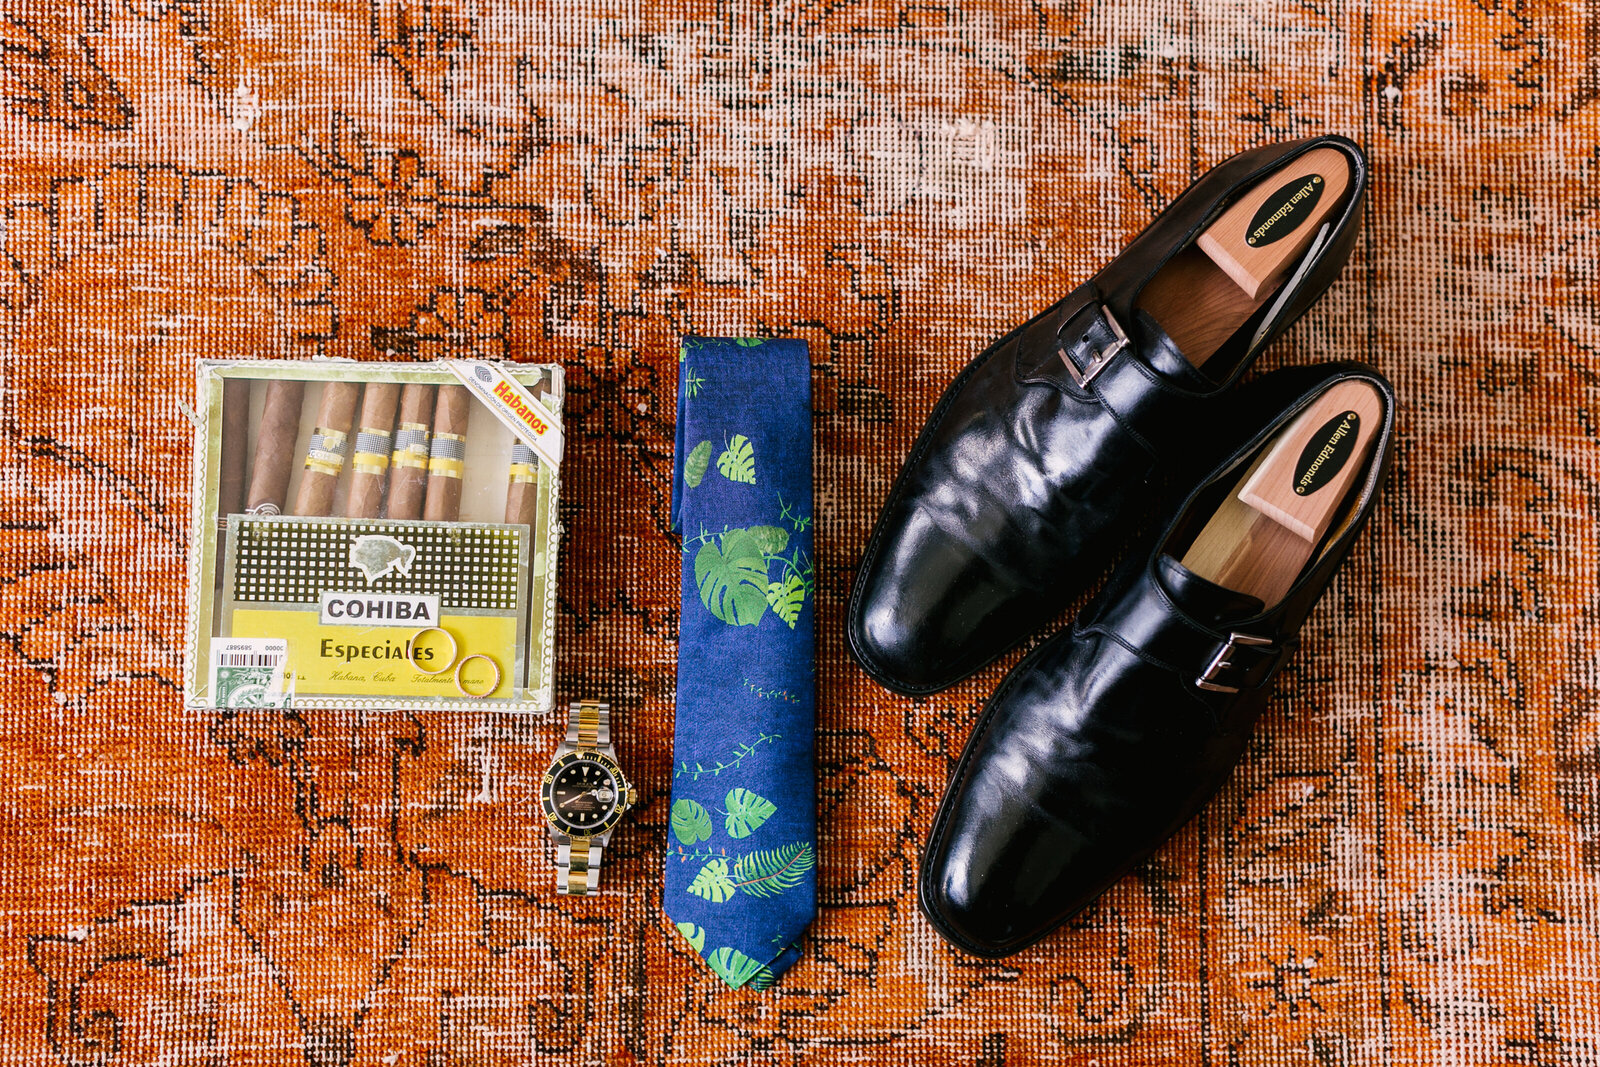 grooms details with tie and cigars